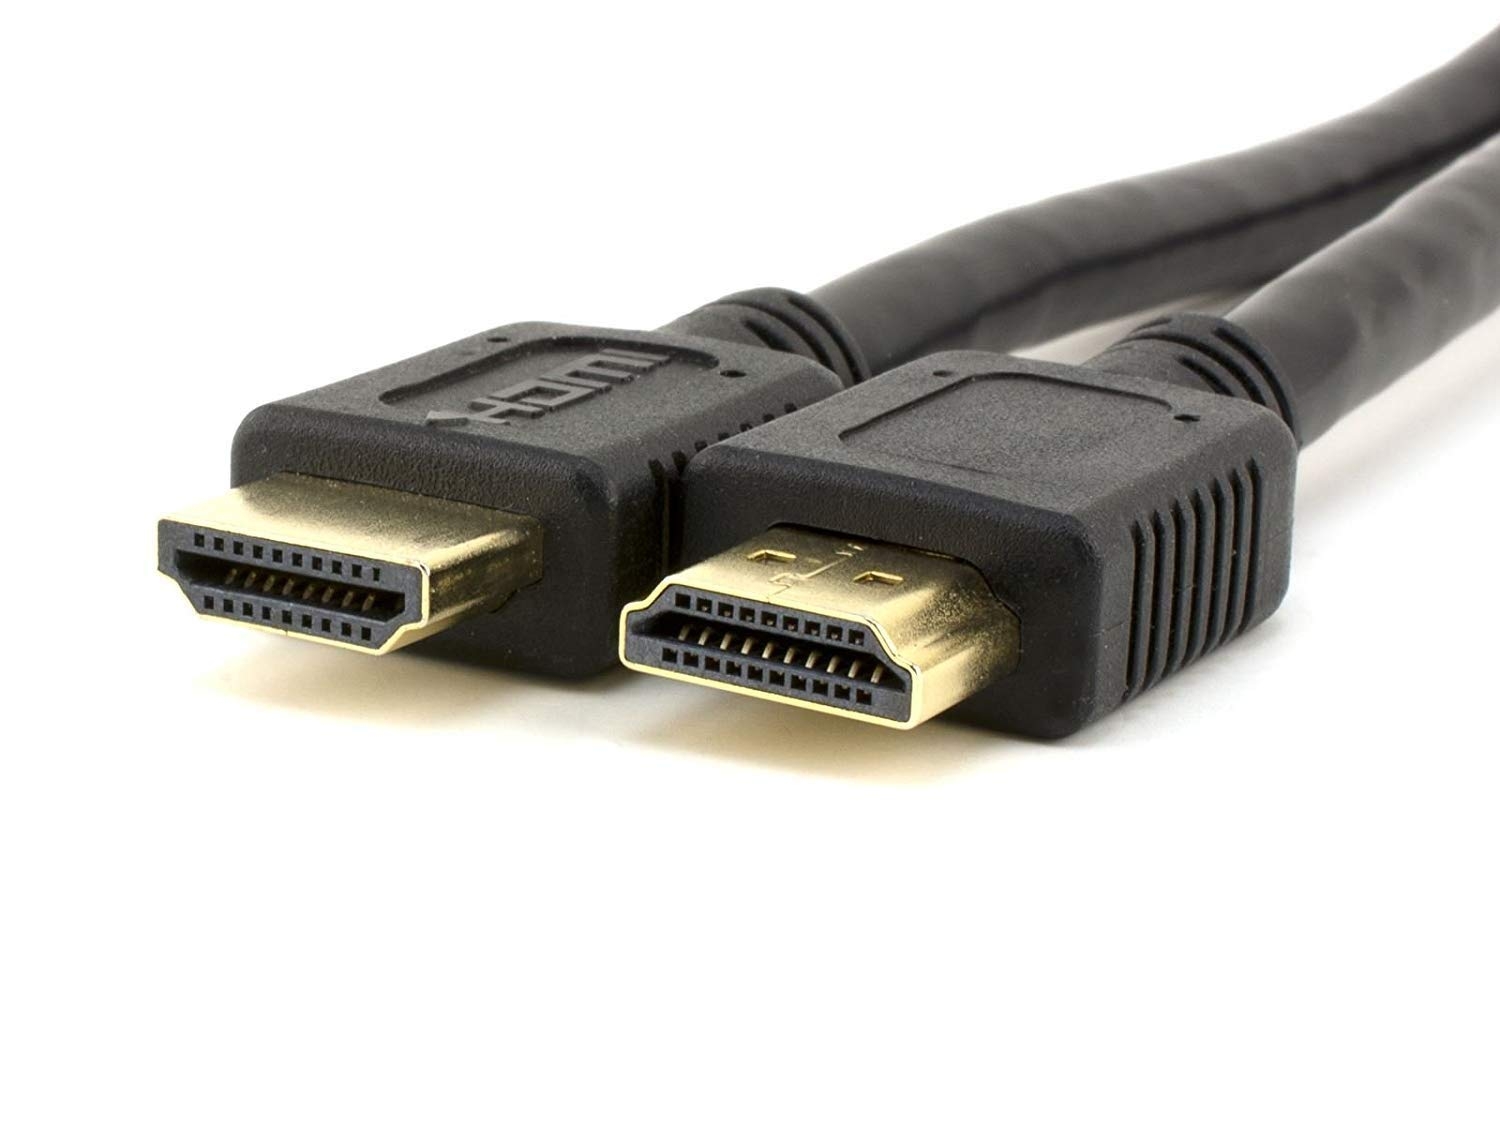 Terabyte LC0037 5m 3D HDMI Cable (Black)